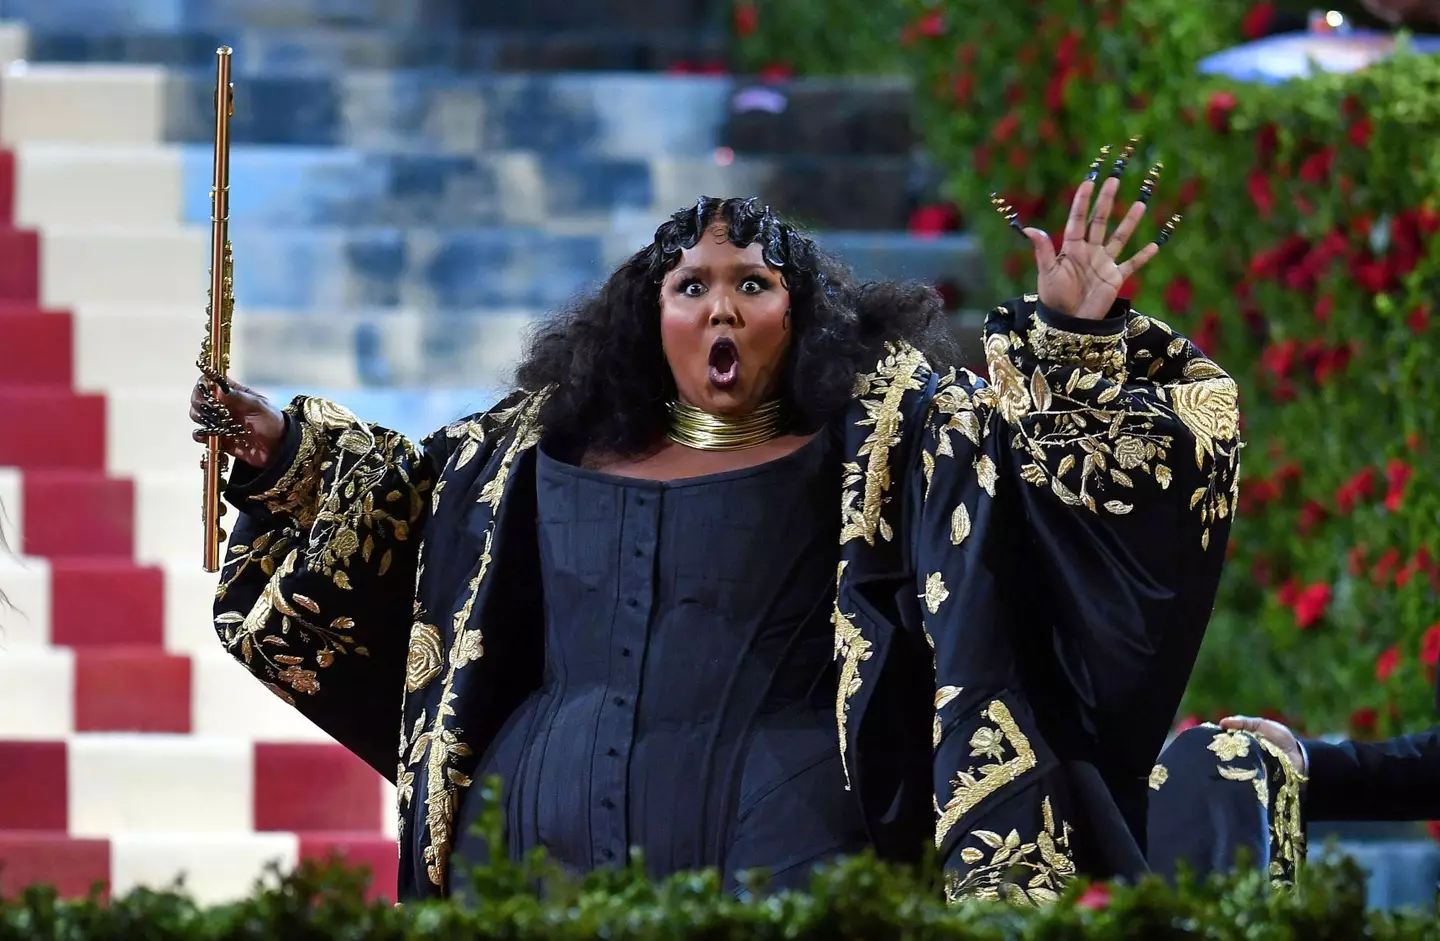 Lizzo graced the red carpet with her flute last year.